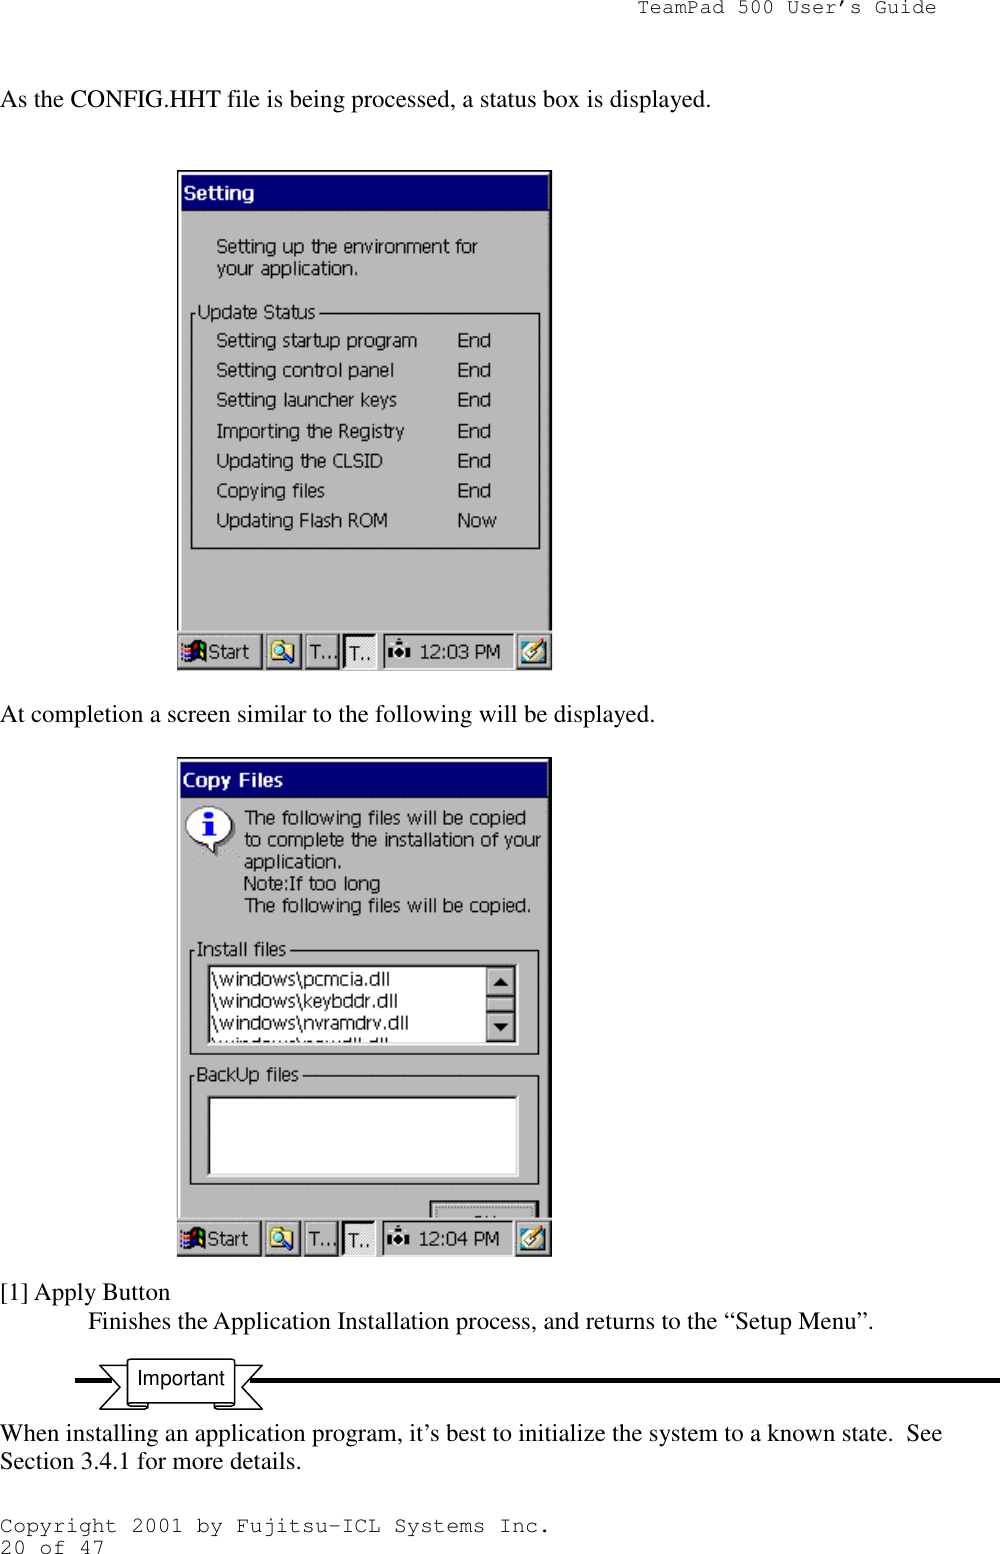                TeamPad 500 User’s GuideCopyright 2001 by Fujitsu-ICL Systems Inc.20 of 47As the CONFIG.HHT file is being processed, a status box is displayed.At completion a screen similar to the following will be displayed.[1] Apply ButtonFinishes the Application Installation process, and returns to the “Setup Menu”.When installing an application program, it’s best to initialize the system to a known state.  SeeSection 3.4.1 for more details.Important